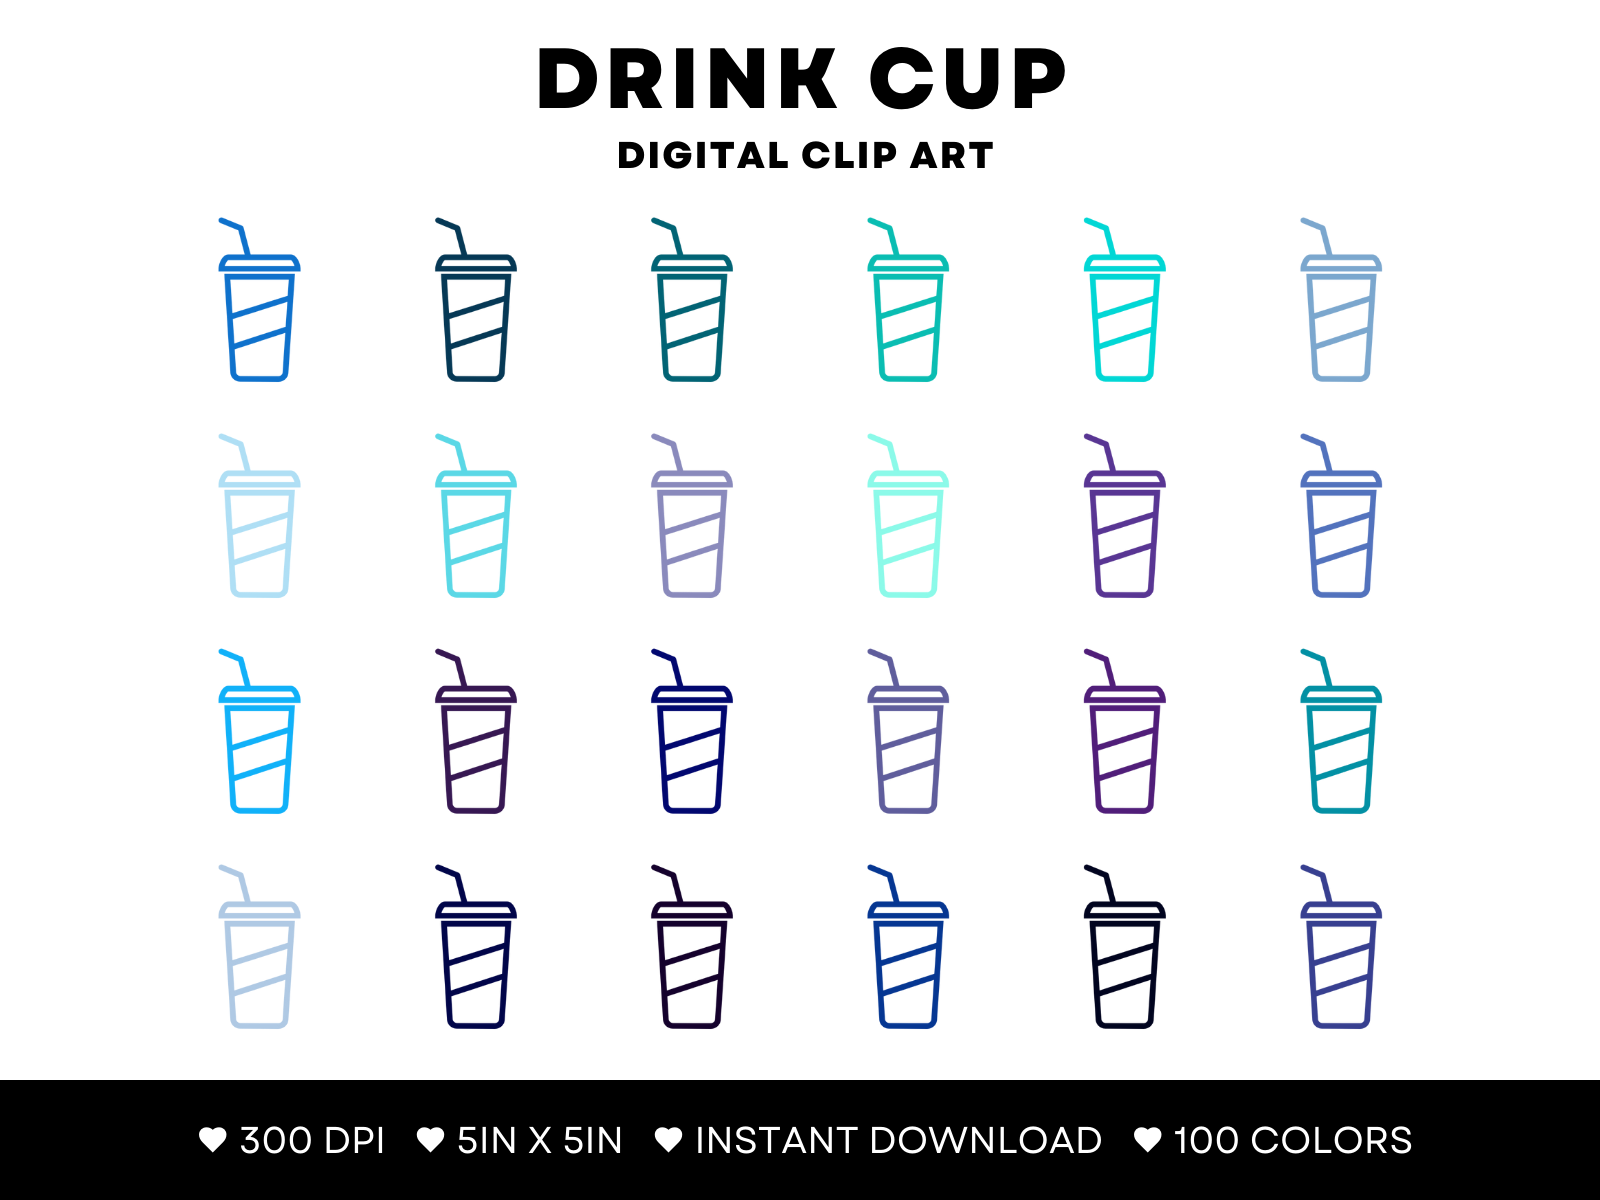 https://www.creativefabrica.com/wp-content/uploads/2021/09/23/Drink-Cup-Illustration-Graphics-17734064-1.png